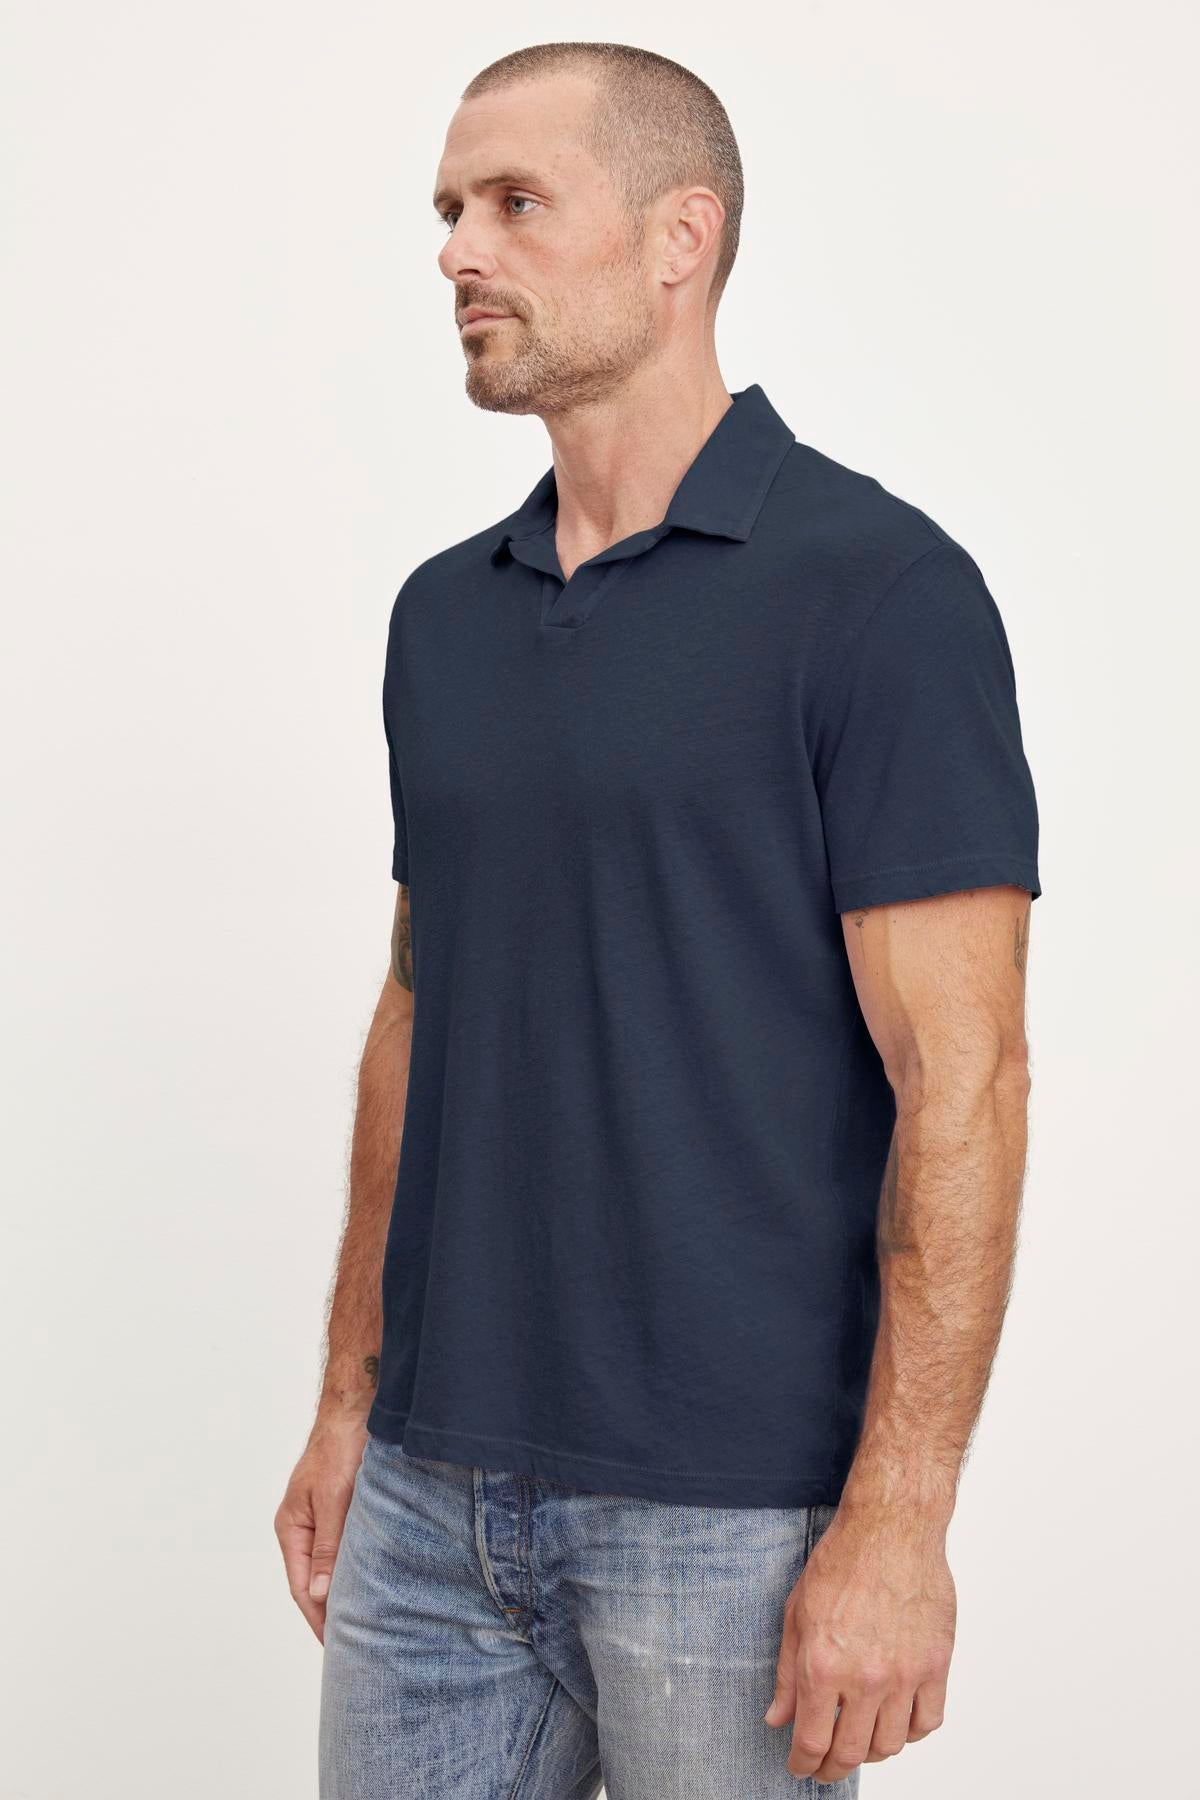 A man in a navy blue Velvet by Graham & Spencer BECK POLO linen blend polo shirt and jeans, standing in a profile view with a neutral expression.-36890691829953